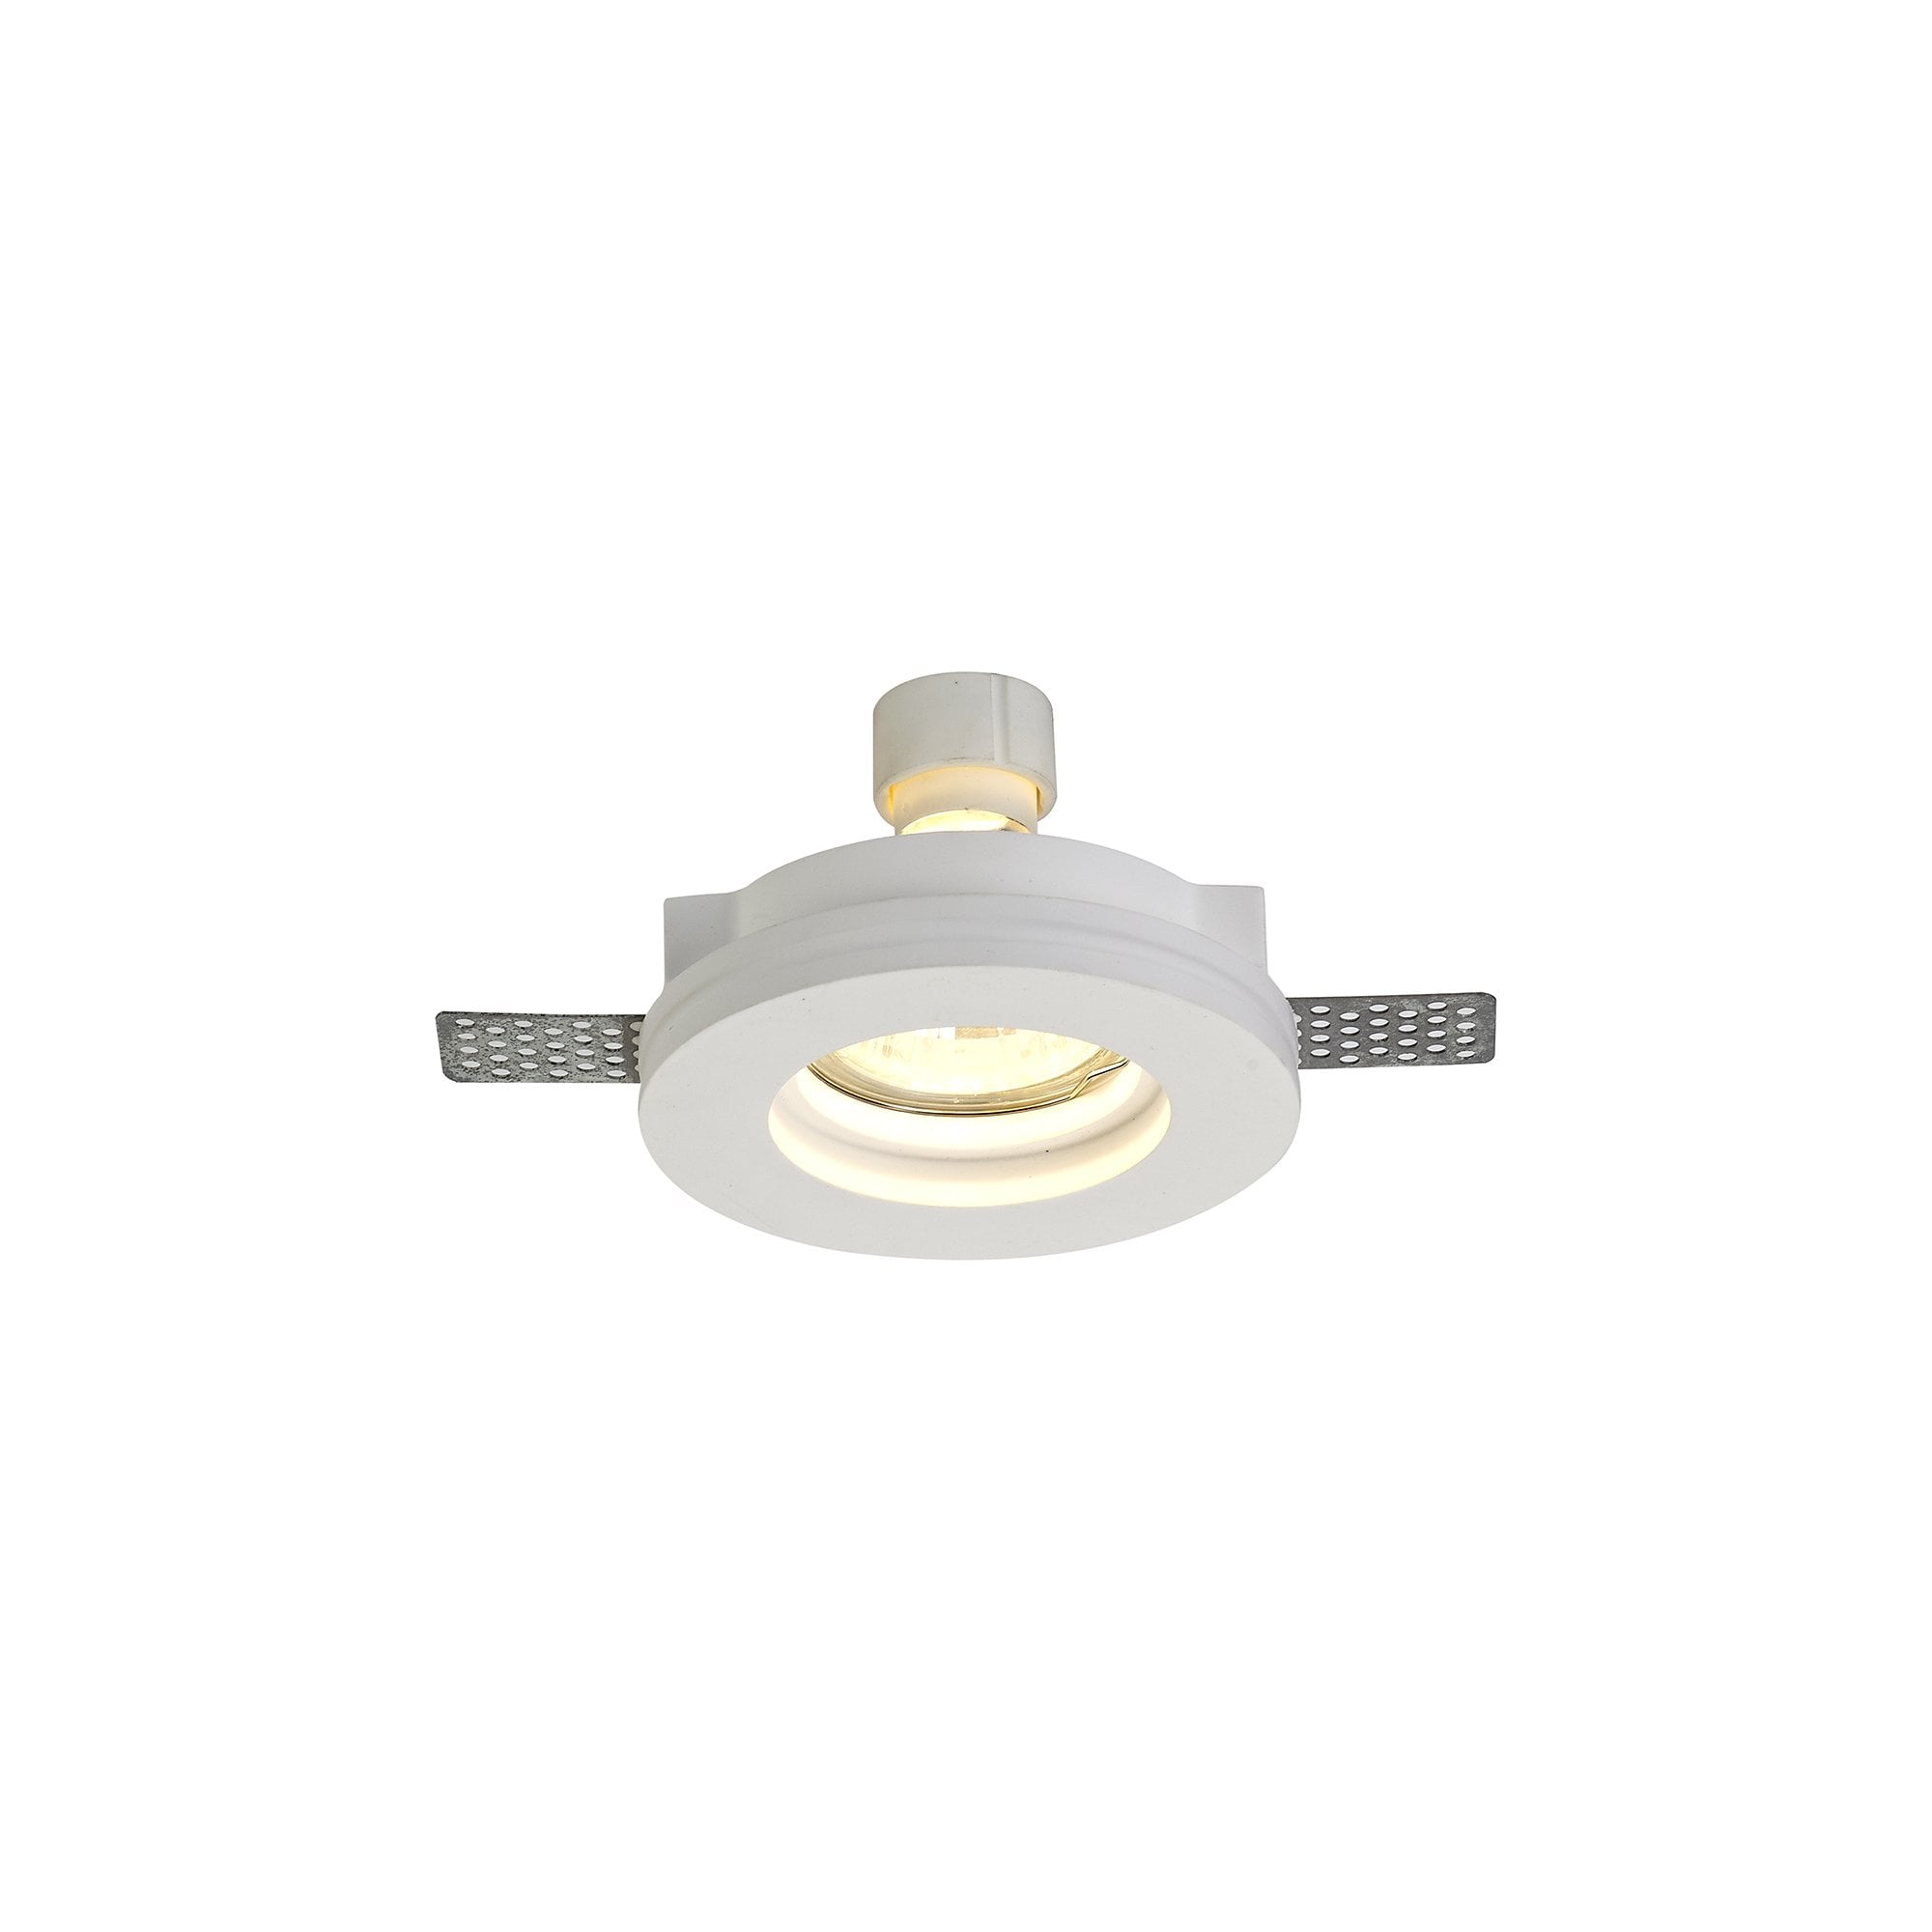 Round Stepped Recessed Spotlight, GU10, White Paintable Gypsum, Cut Out: D:103mm